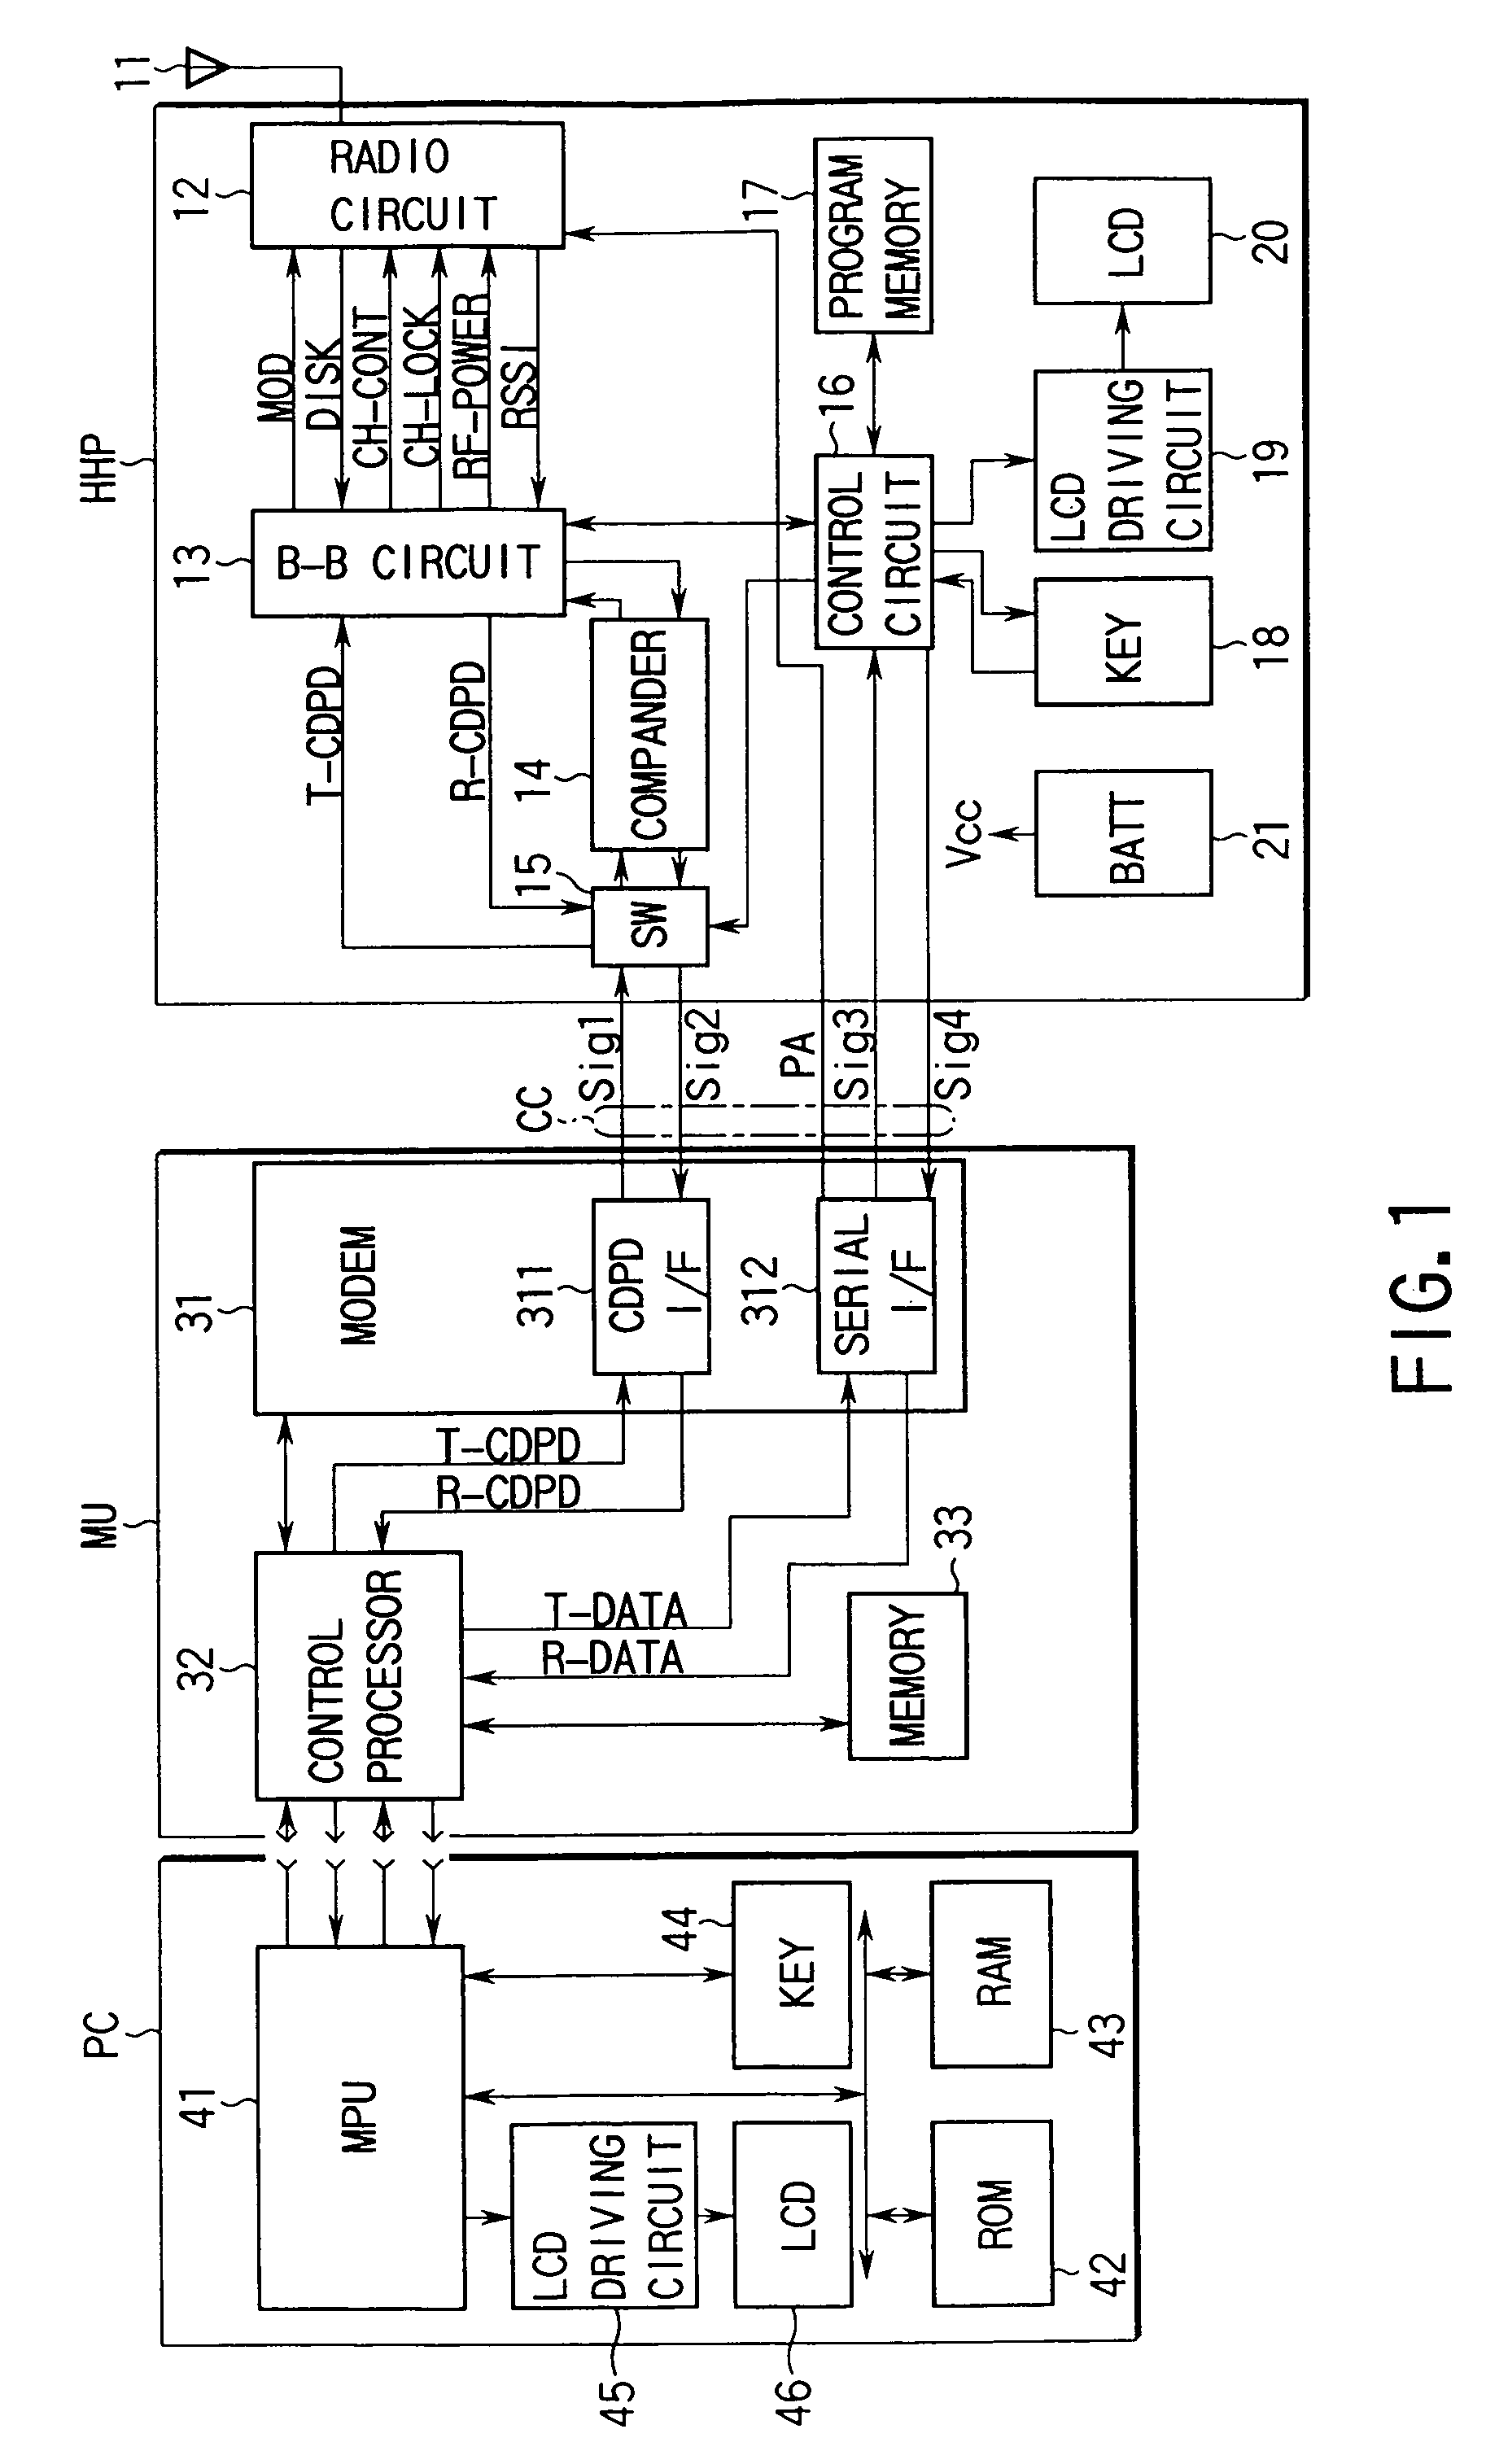 Mobile communication terminal apparatus with data communication function